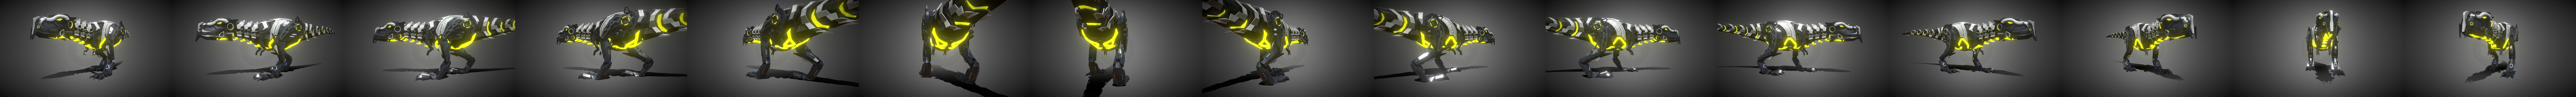 T-Rex (Walk Cycle, Run Cycle, Idle) WIP - Buy Royalty Free 3D model by  Jerome Angeles (@jeromeangeles) [6e54fbc]